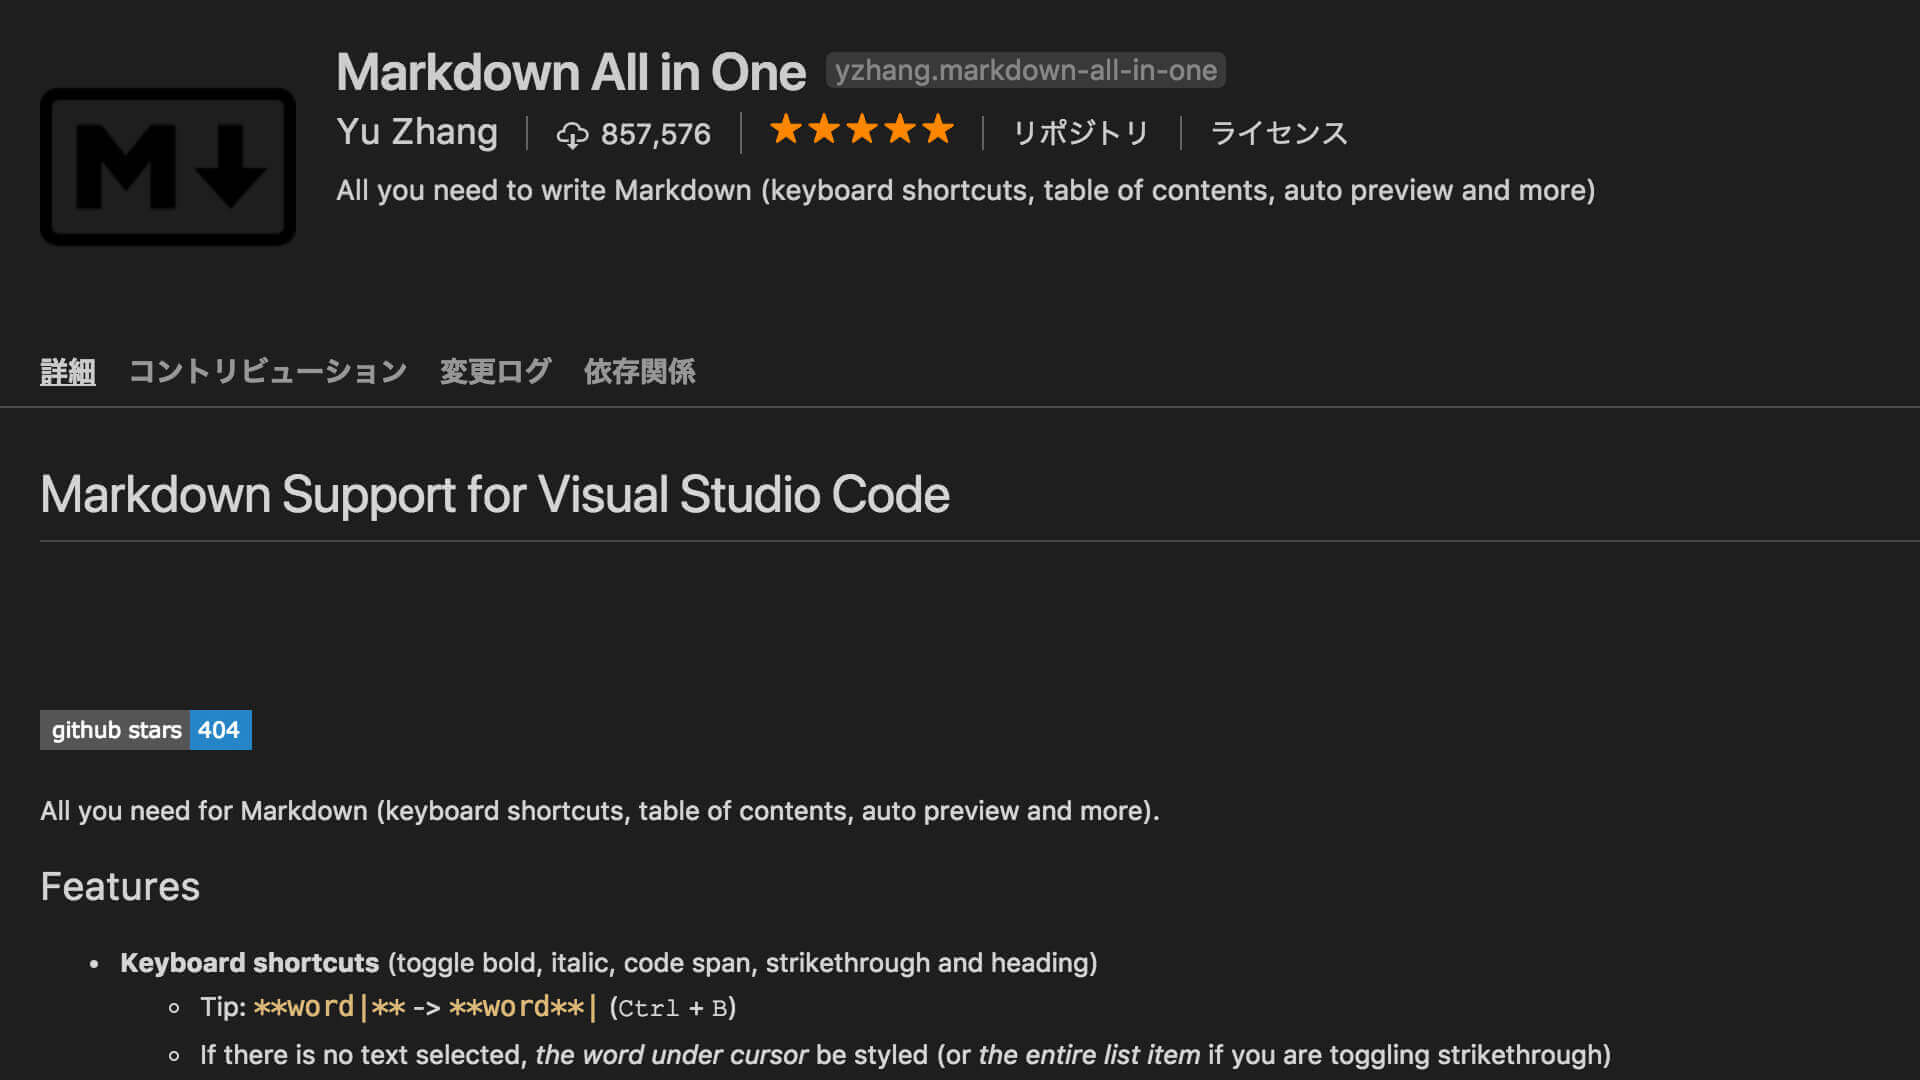 Markdown All in One